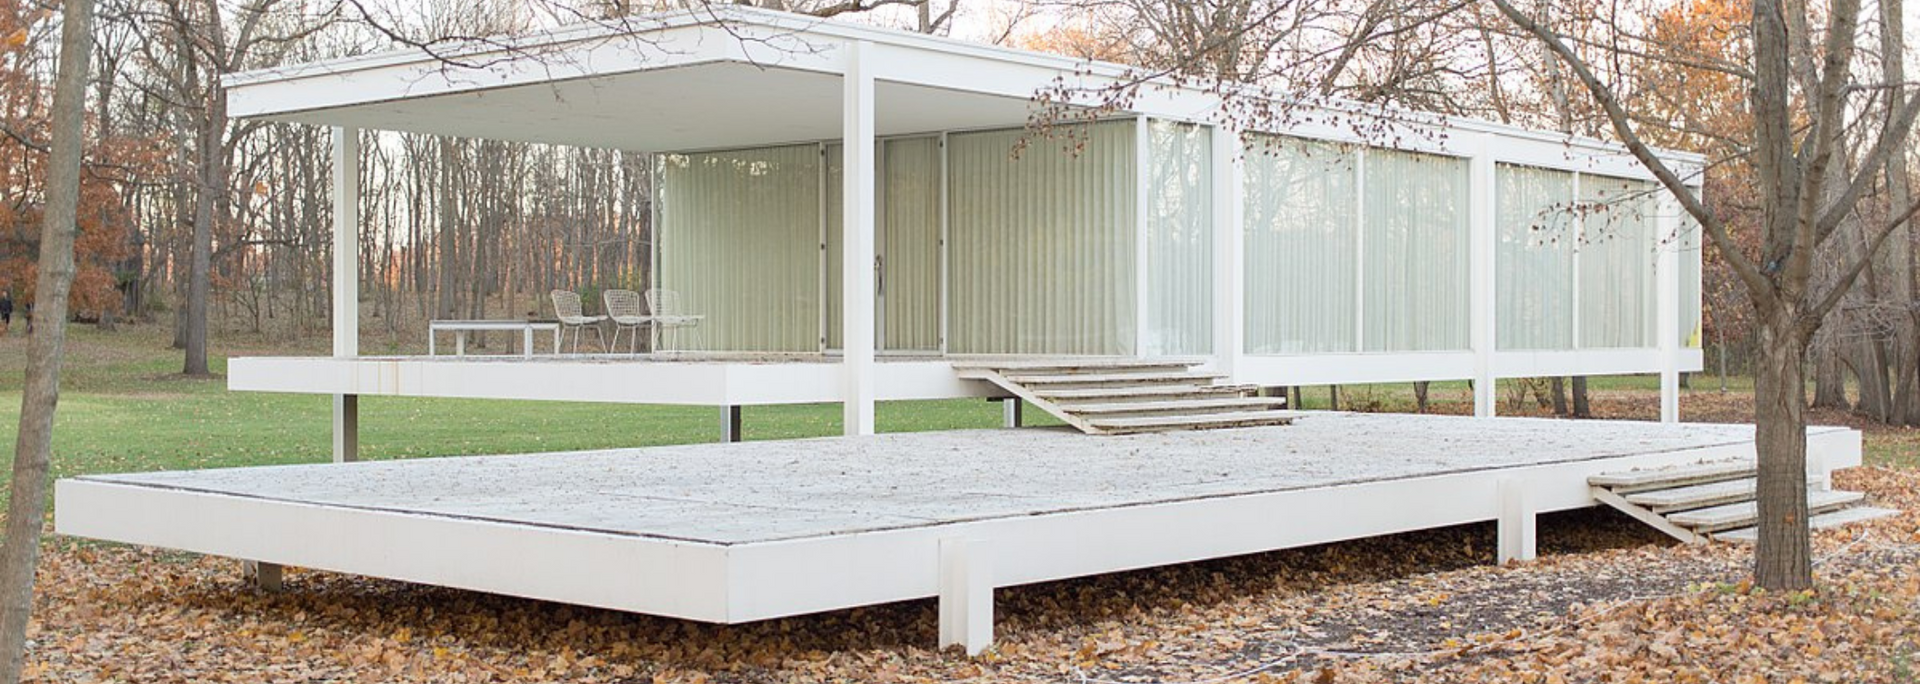 Picture of the Farnsworth House
